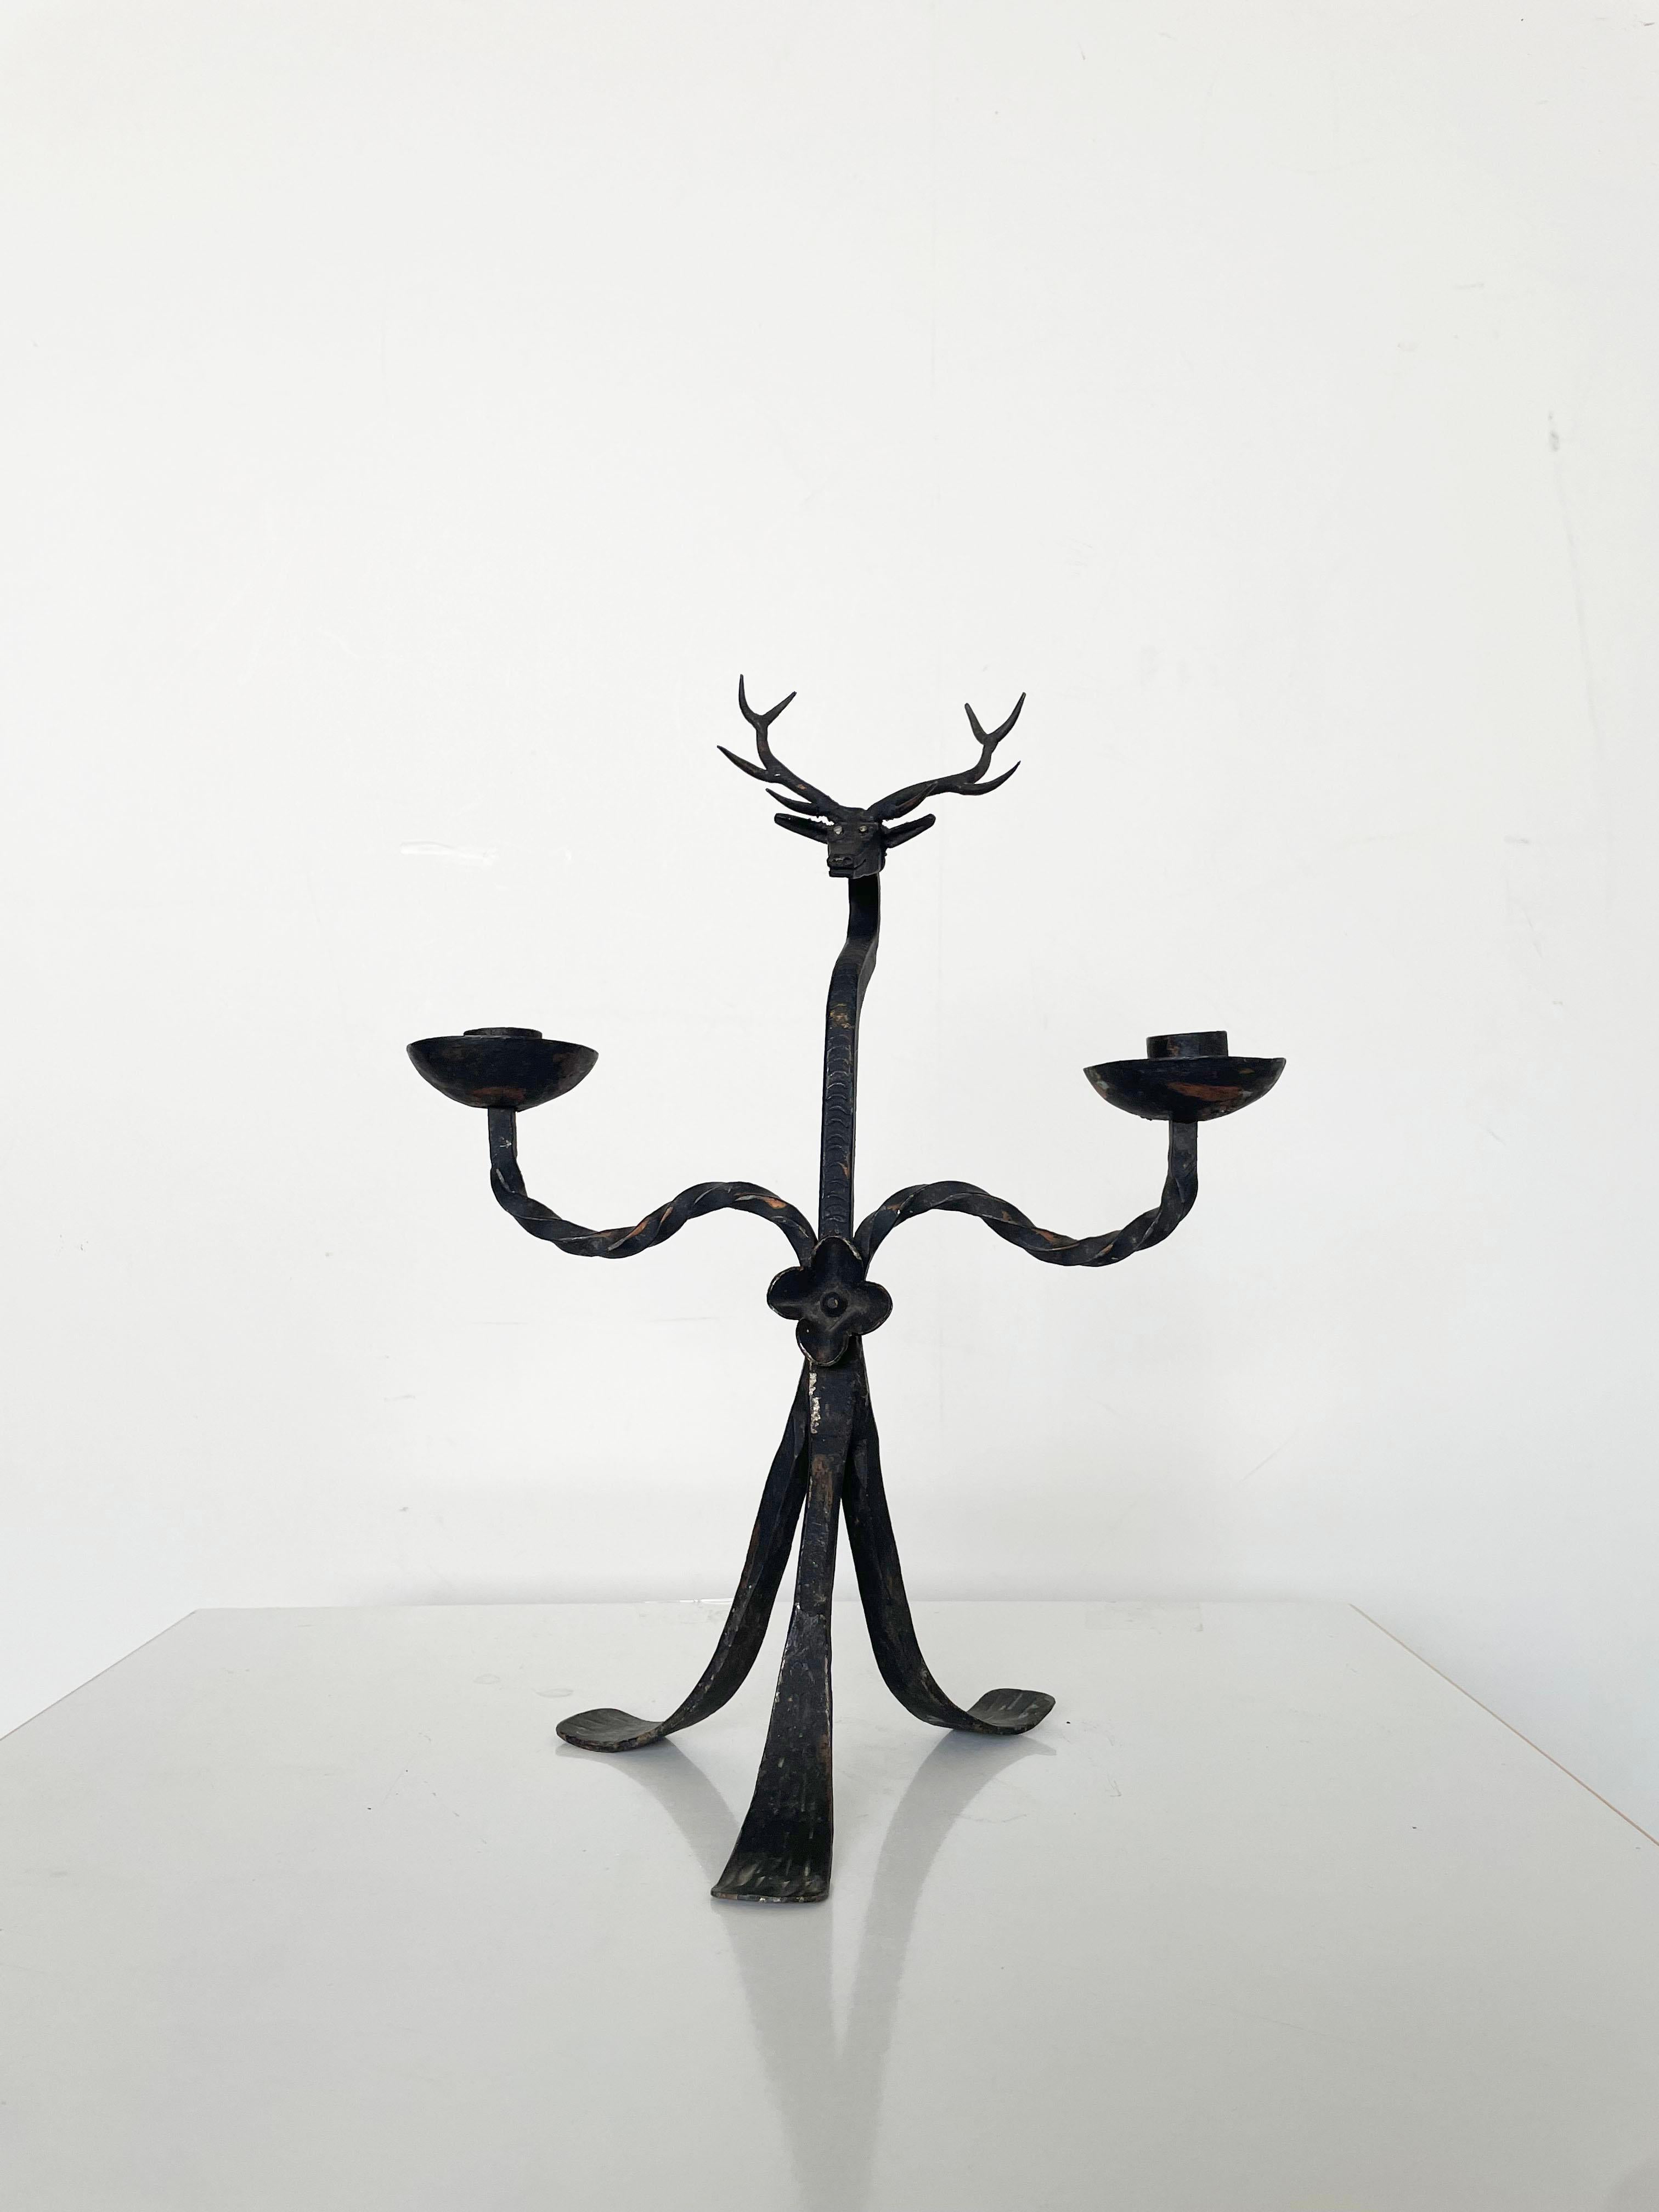 Brutalist Style Wrought Iron Deer Shaped Candlestick Candelabra, 1940s / 1950s For Sale 3